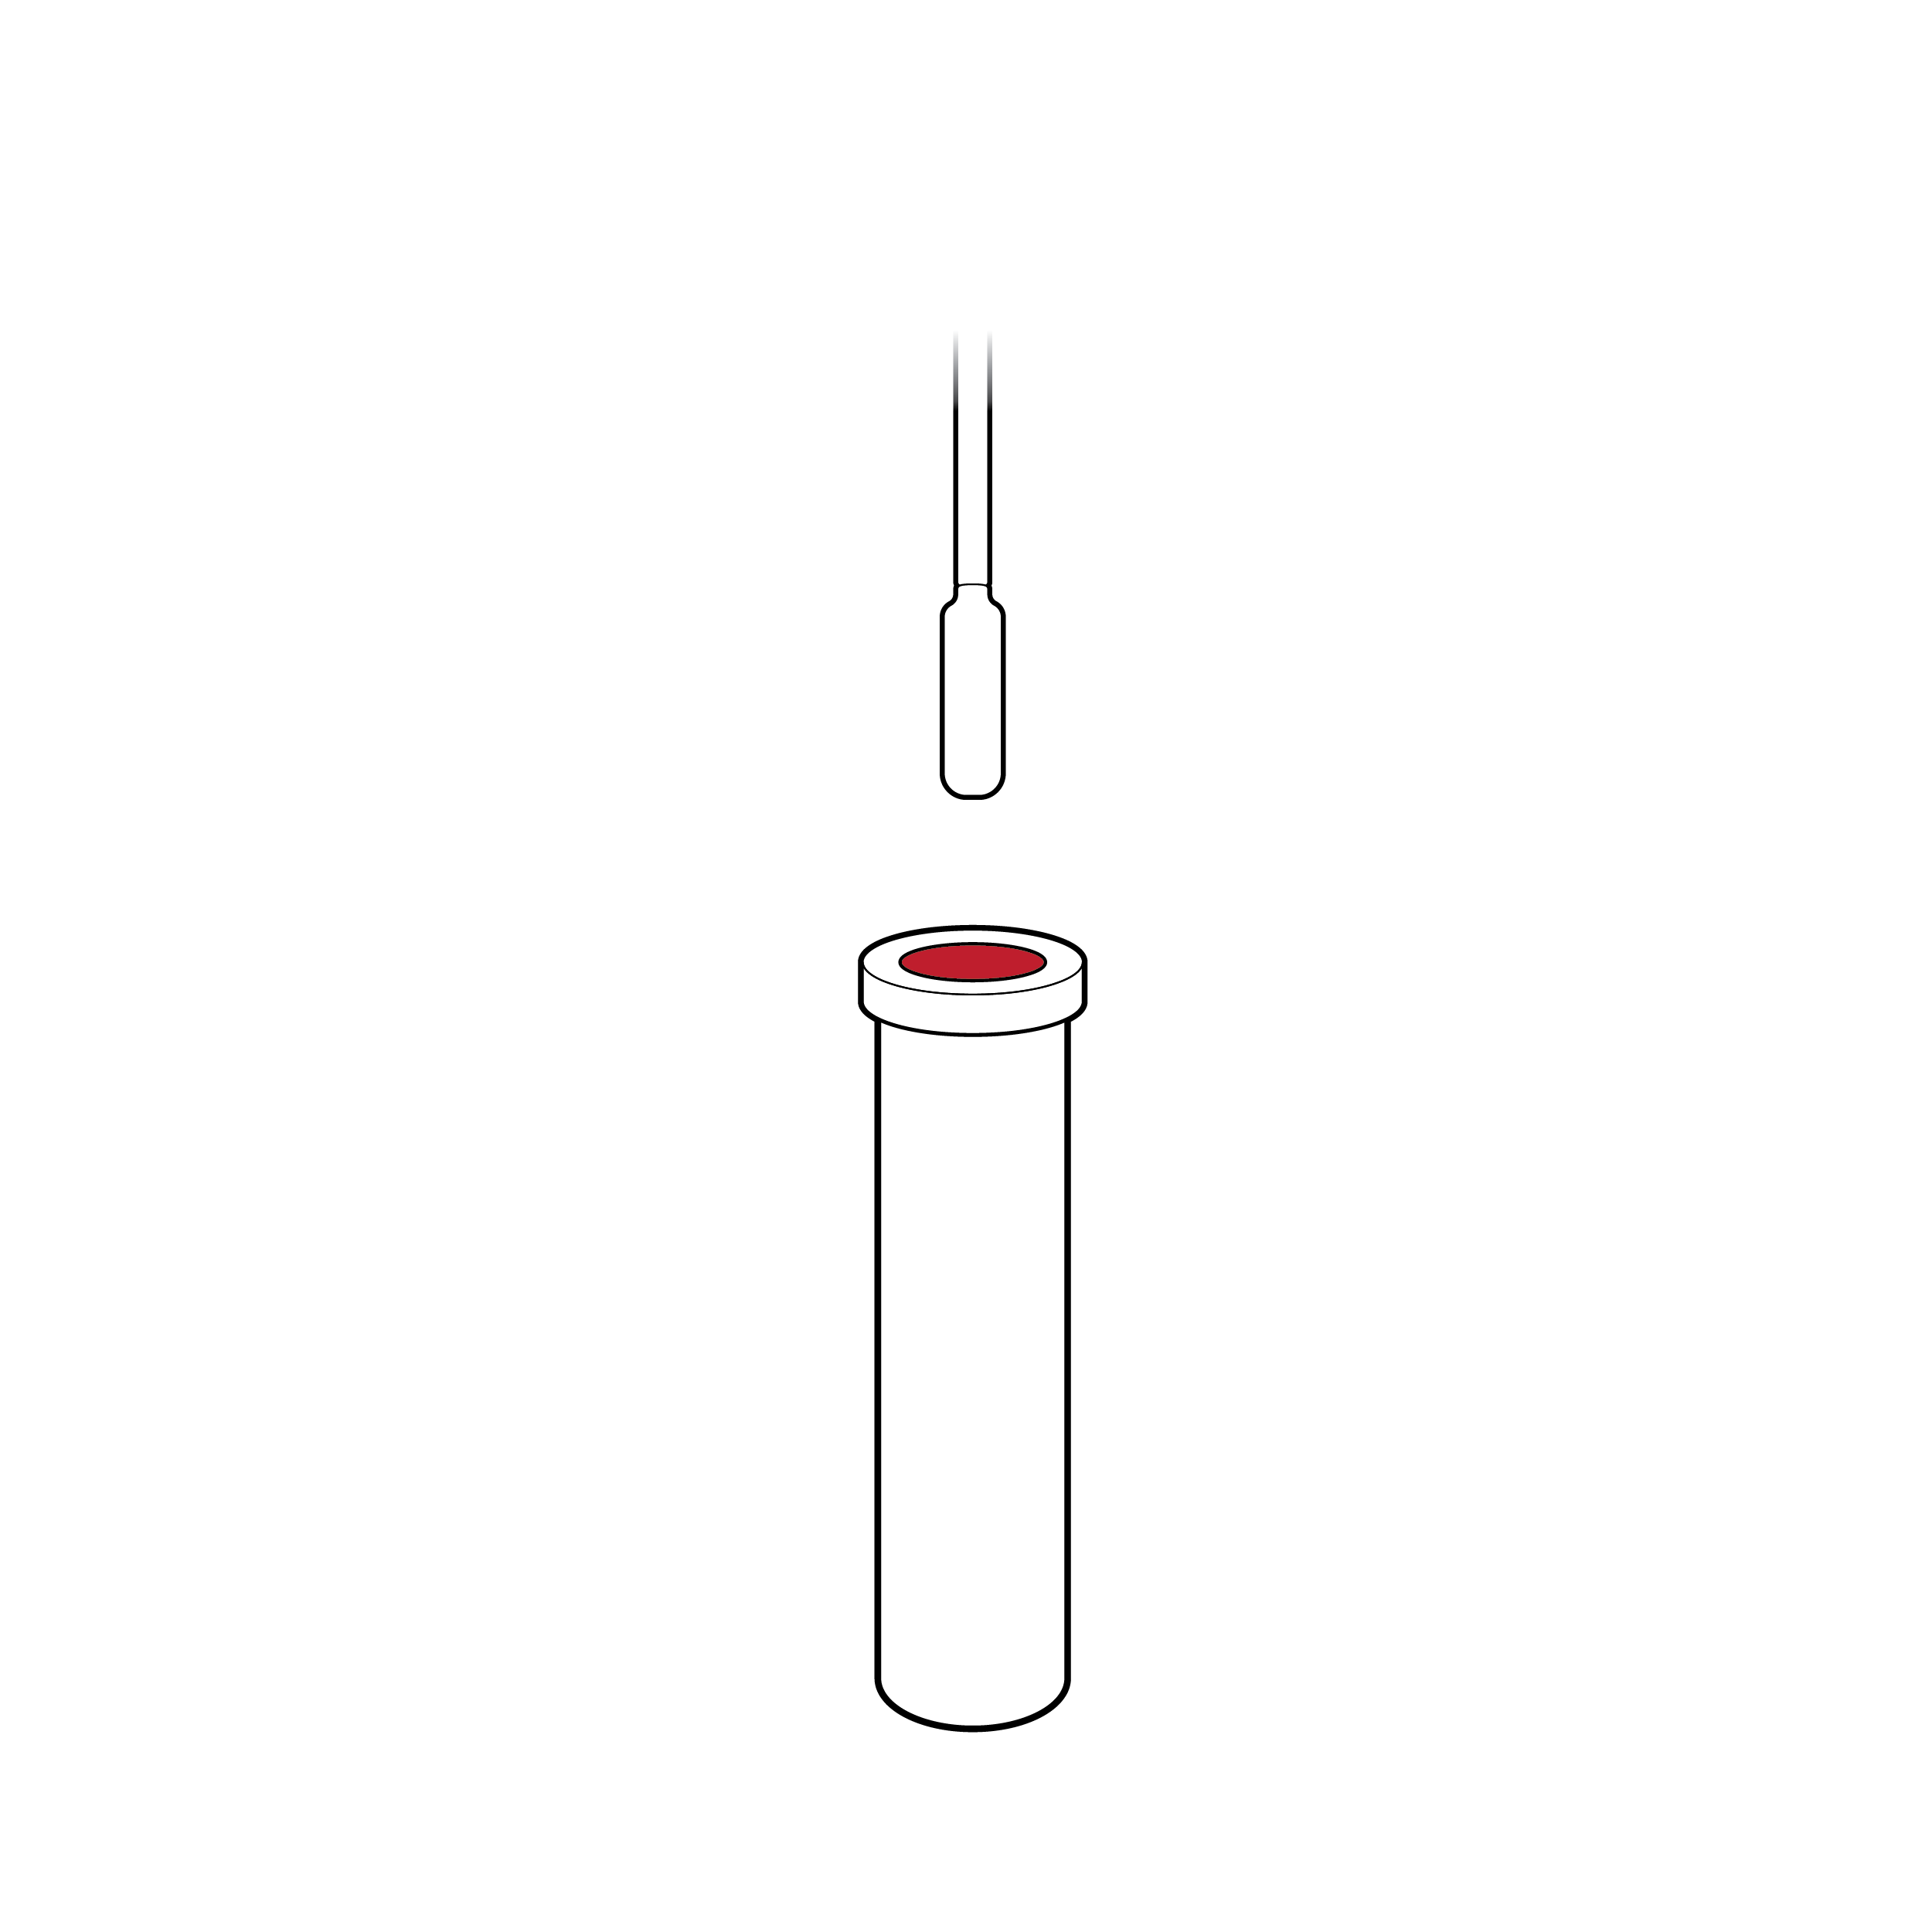 Cylindrical fluid vial with a swab. The opening of the vial is shaded red, indicating difficulty in inserting the swab.